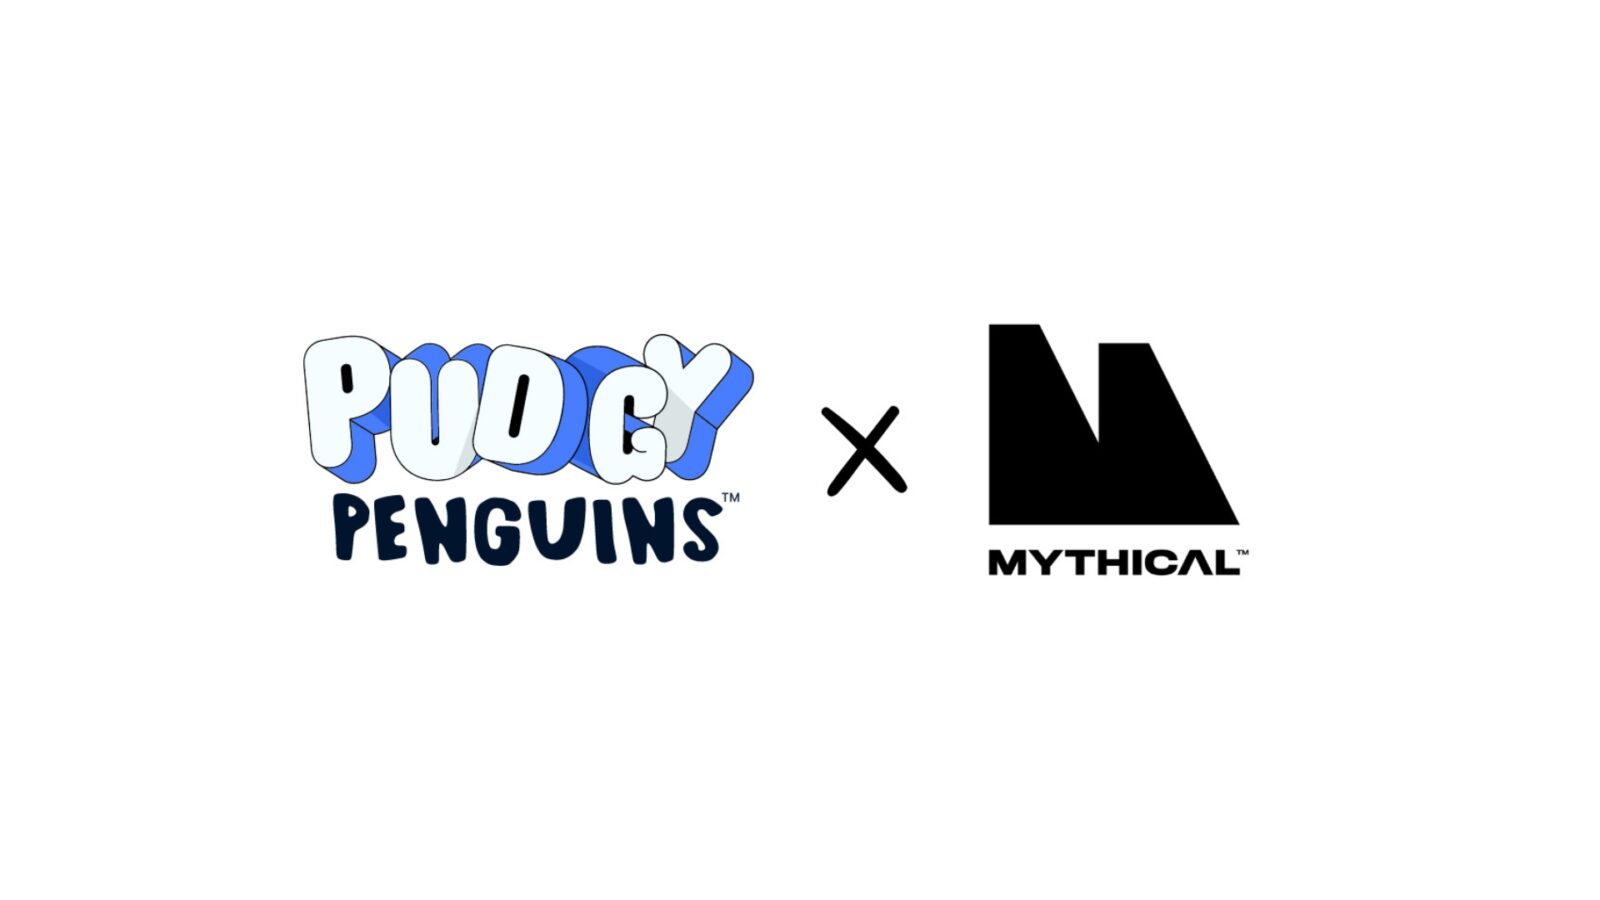 Pudgy Penguins and Mythical Introduce Exciting AAA Mobile Party Game